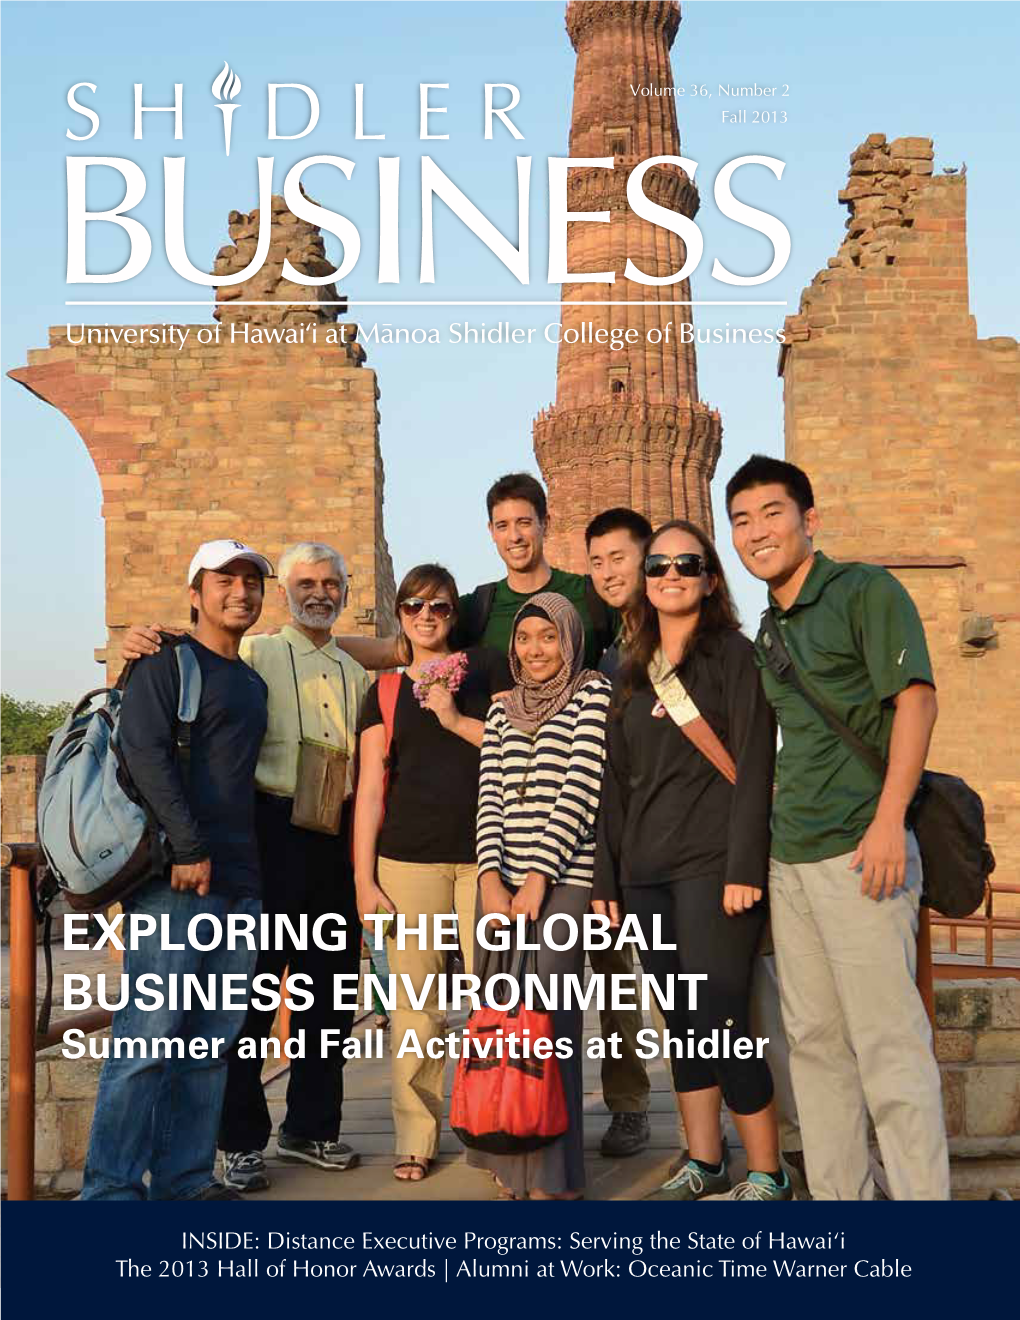 EXPLORING the GLOBAL BUSINESS ENVIRONMENT Summer and Fall Activities at Shidler